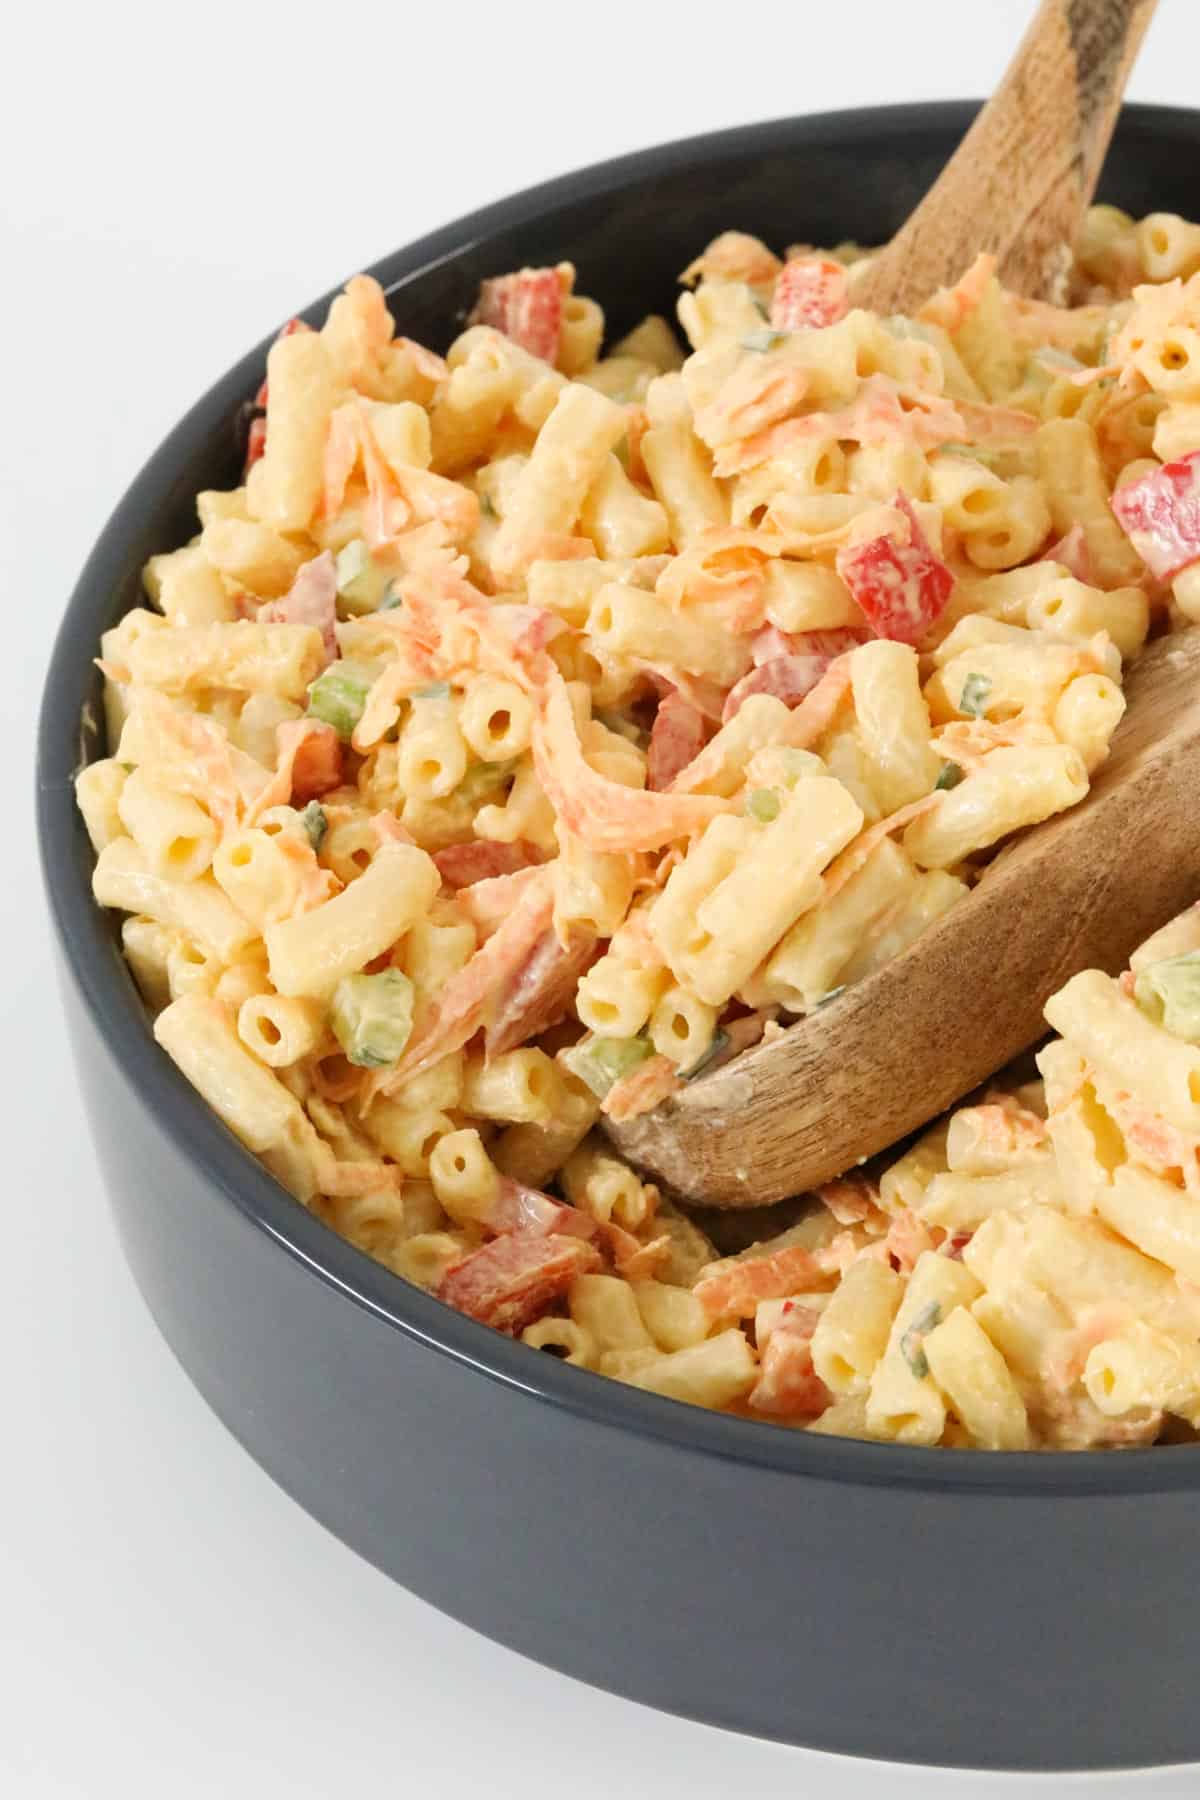 Pasta salad in a black bowl with wooden serving spoons